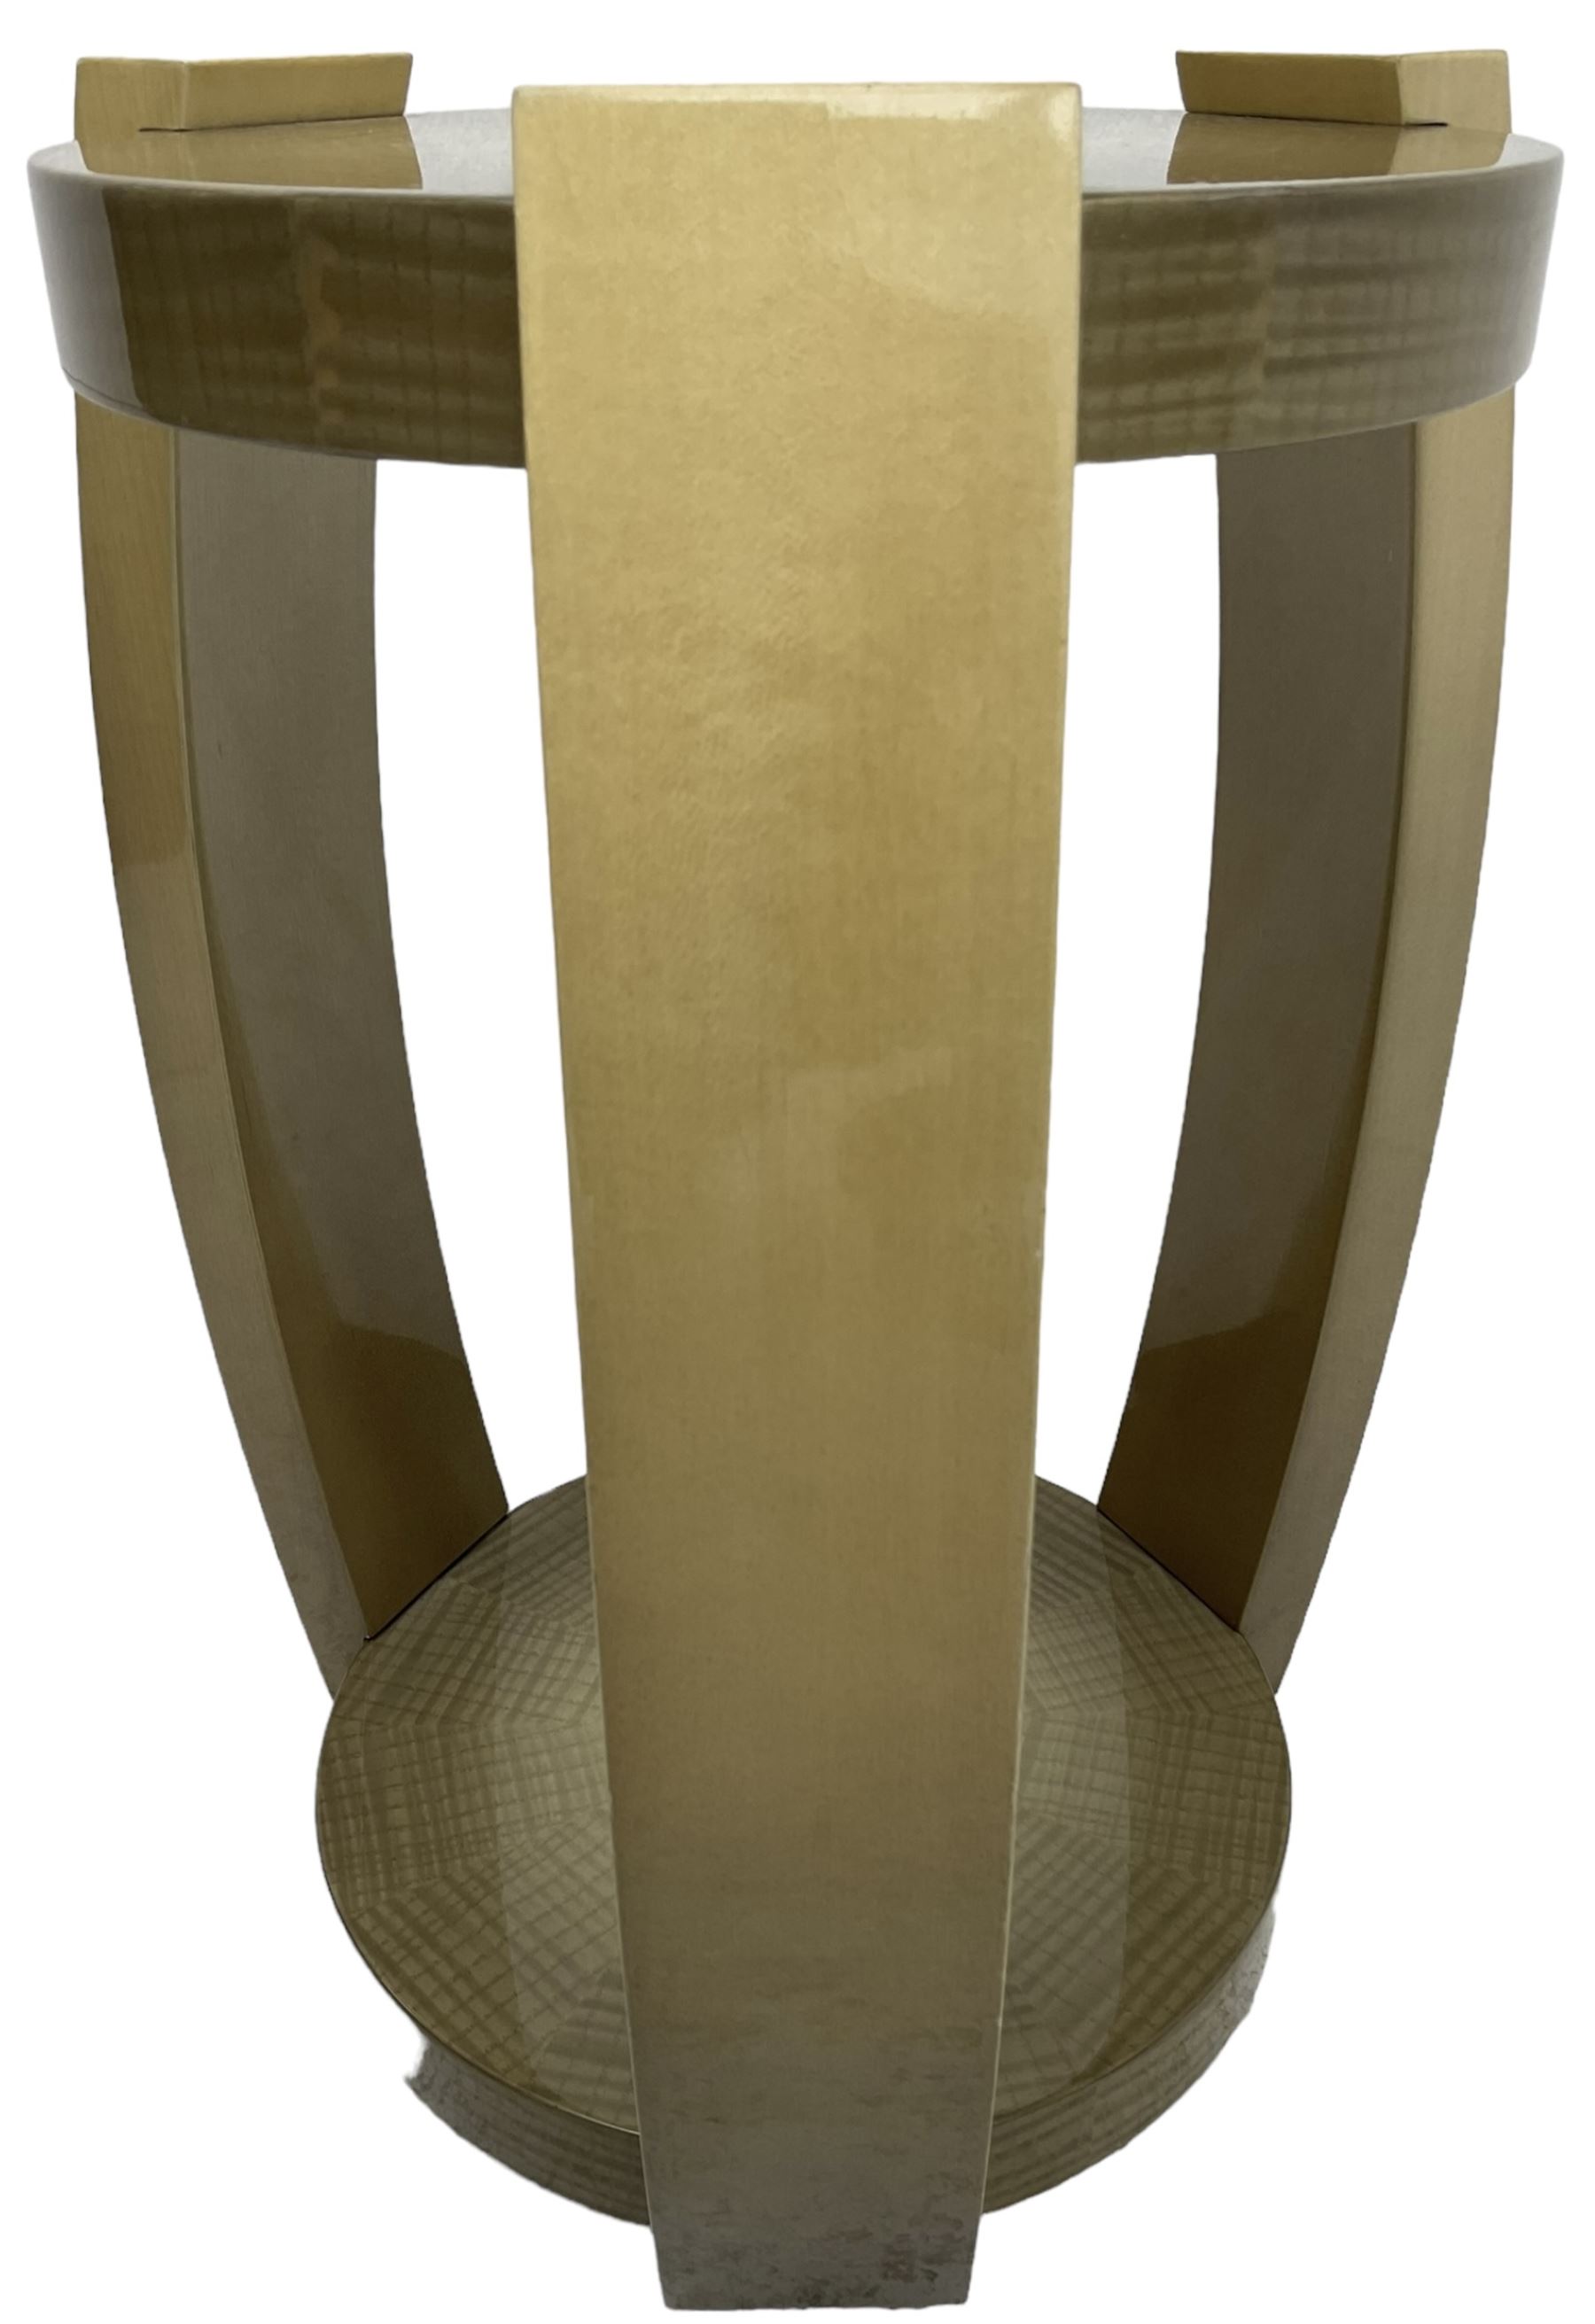 Sally Sirkin Lewis for J Robert Scott - 21st century 'Harlow' two-tier occasional table